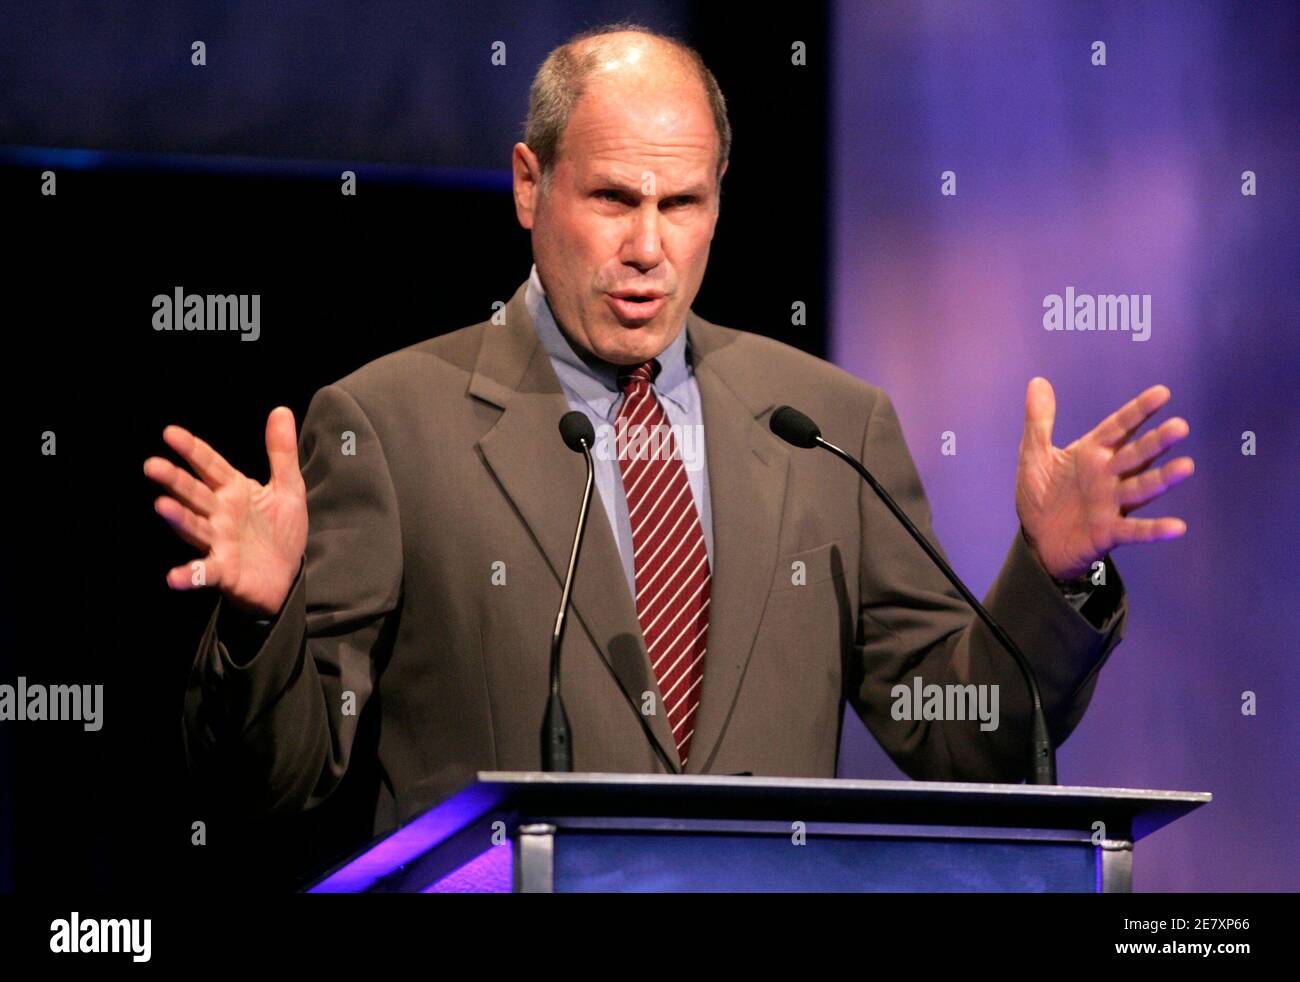 Michael Eisner, CEO of The Walt Disney Company, addresses the Hollywood Radio and Television Society's newsmaker luncheon in Beverly Hills September 27, 2005. Eisner, a prominent leader in the entertainment industry, is stepping down from Disney at the end of September, after leading the company for 21 years. Bob Iger will succeed Eisner. REUTERS/Fred Prouser Stock Photo